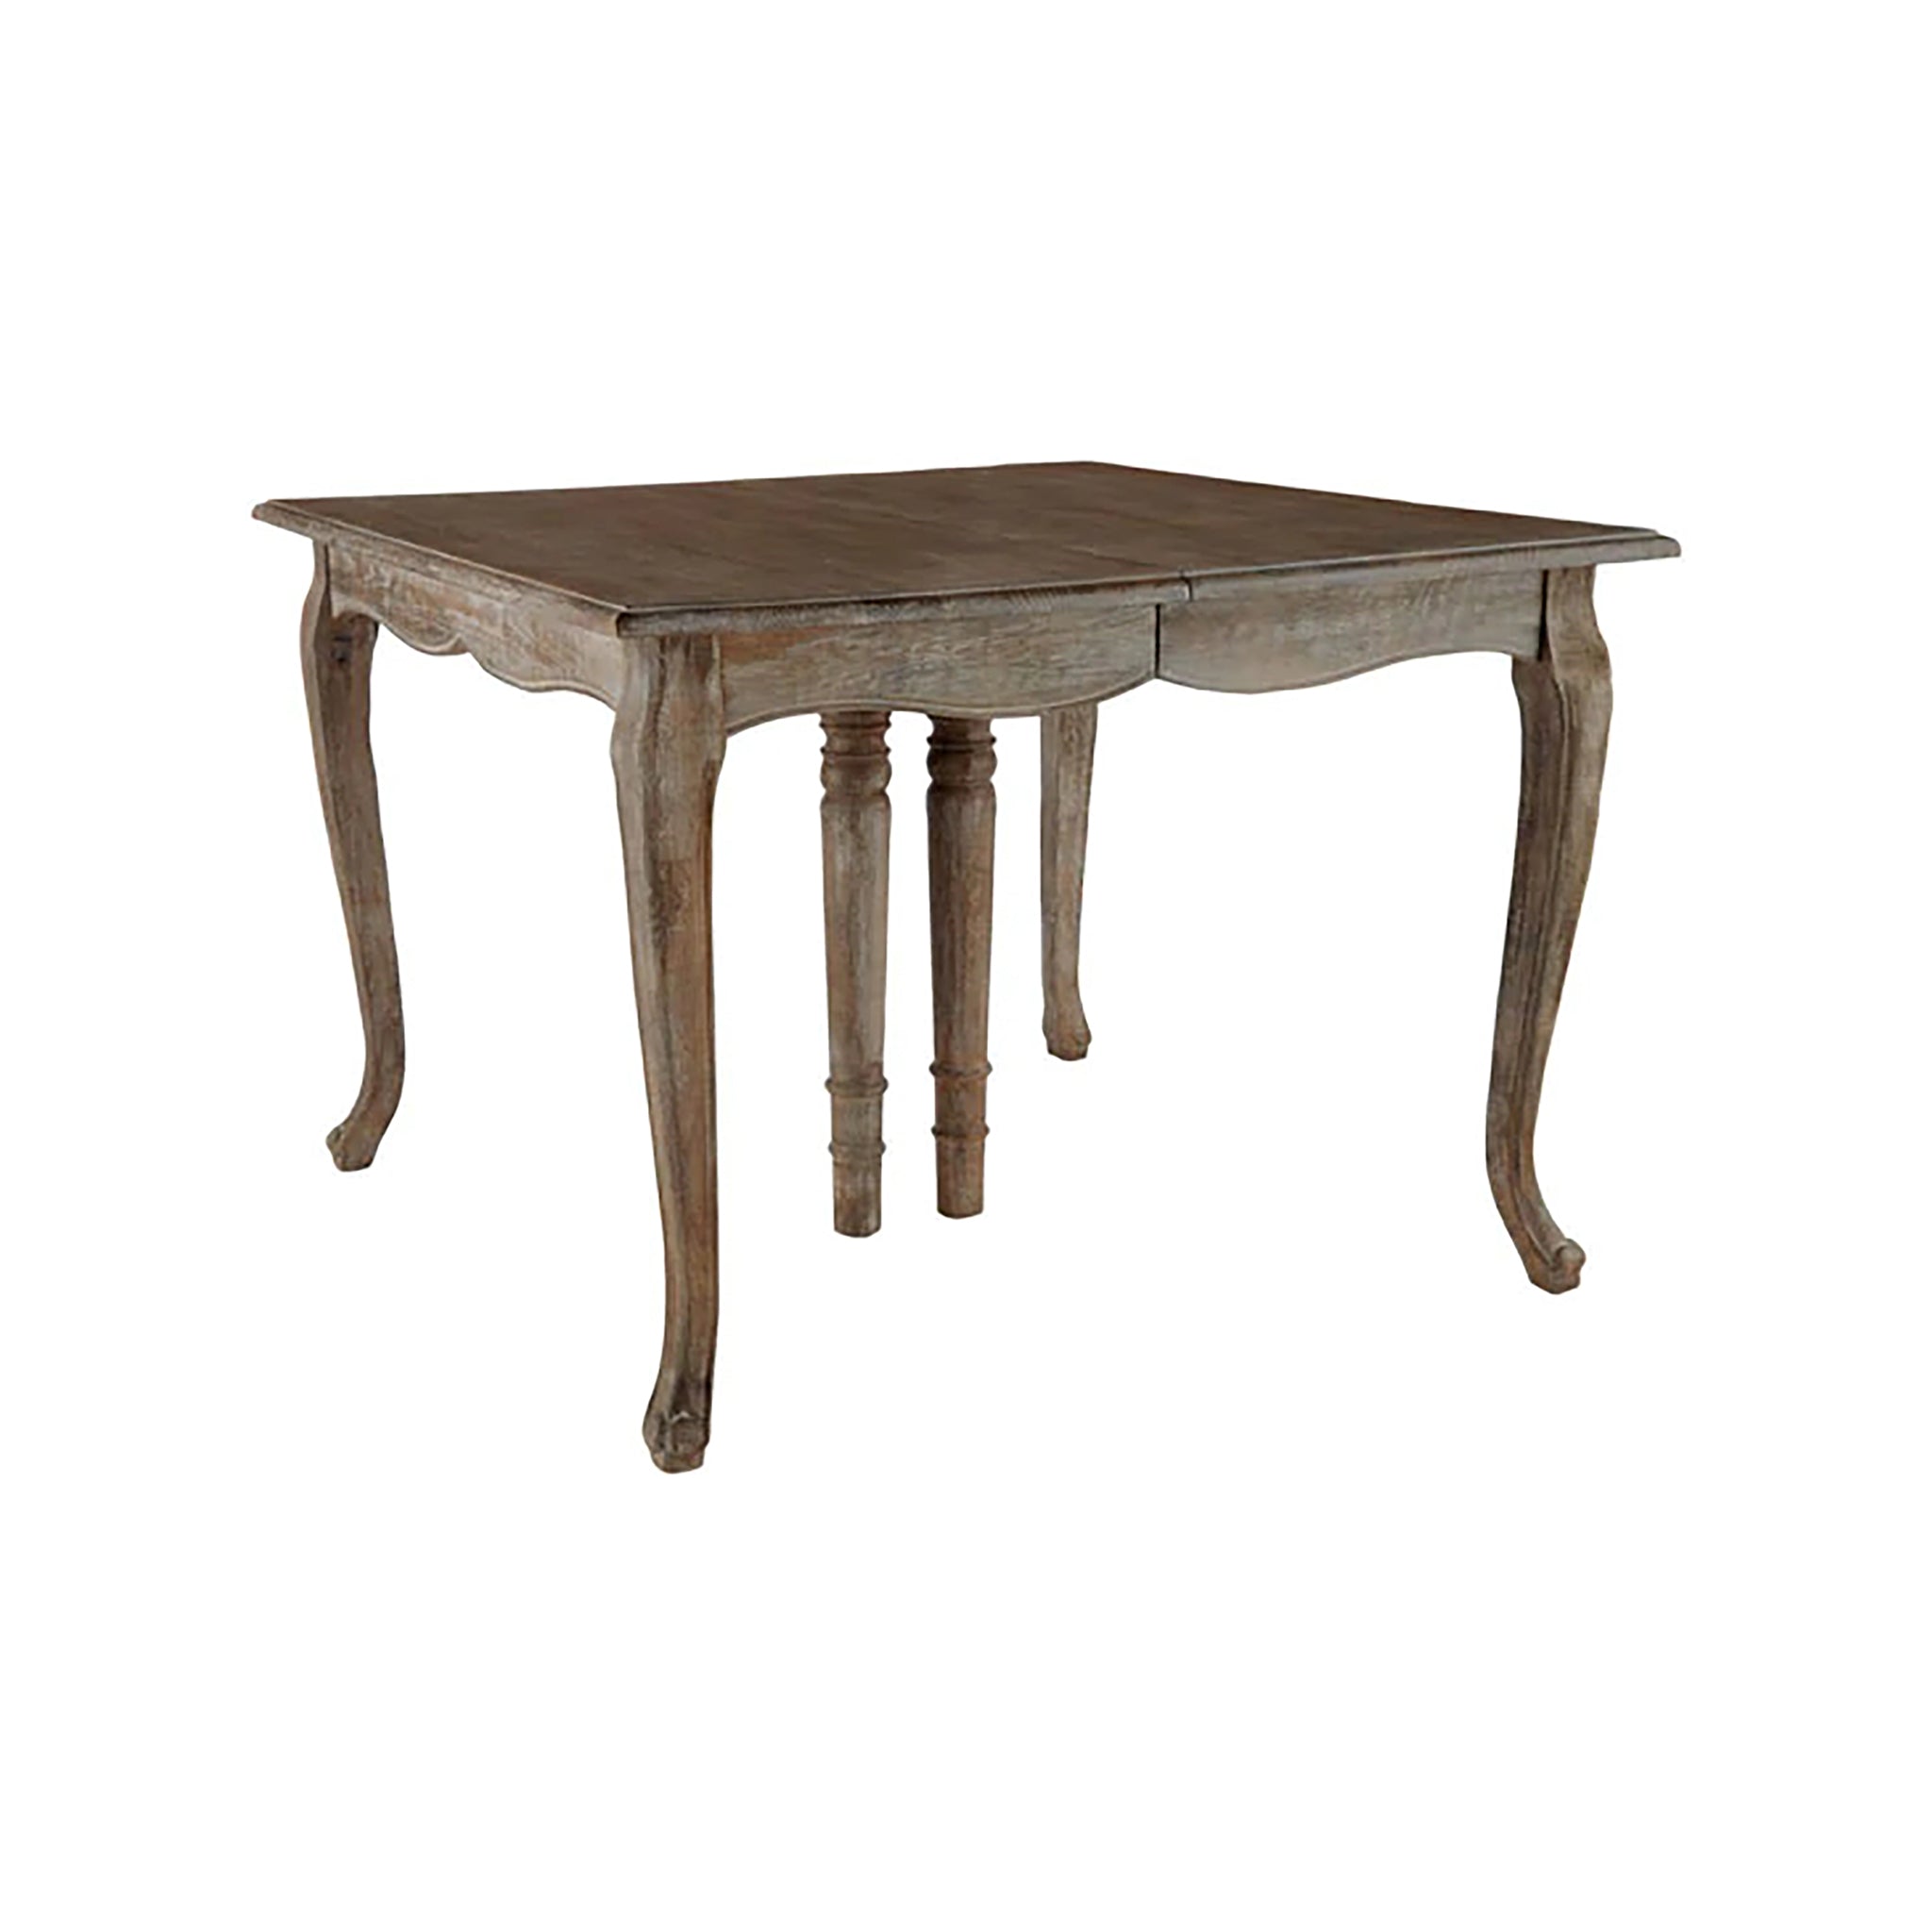 French Country Dining Table - Weathered